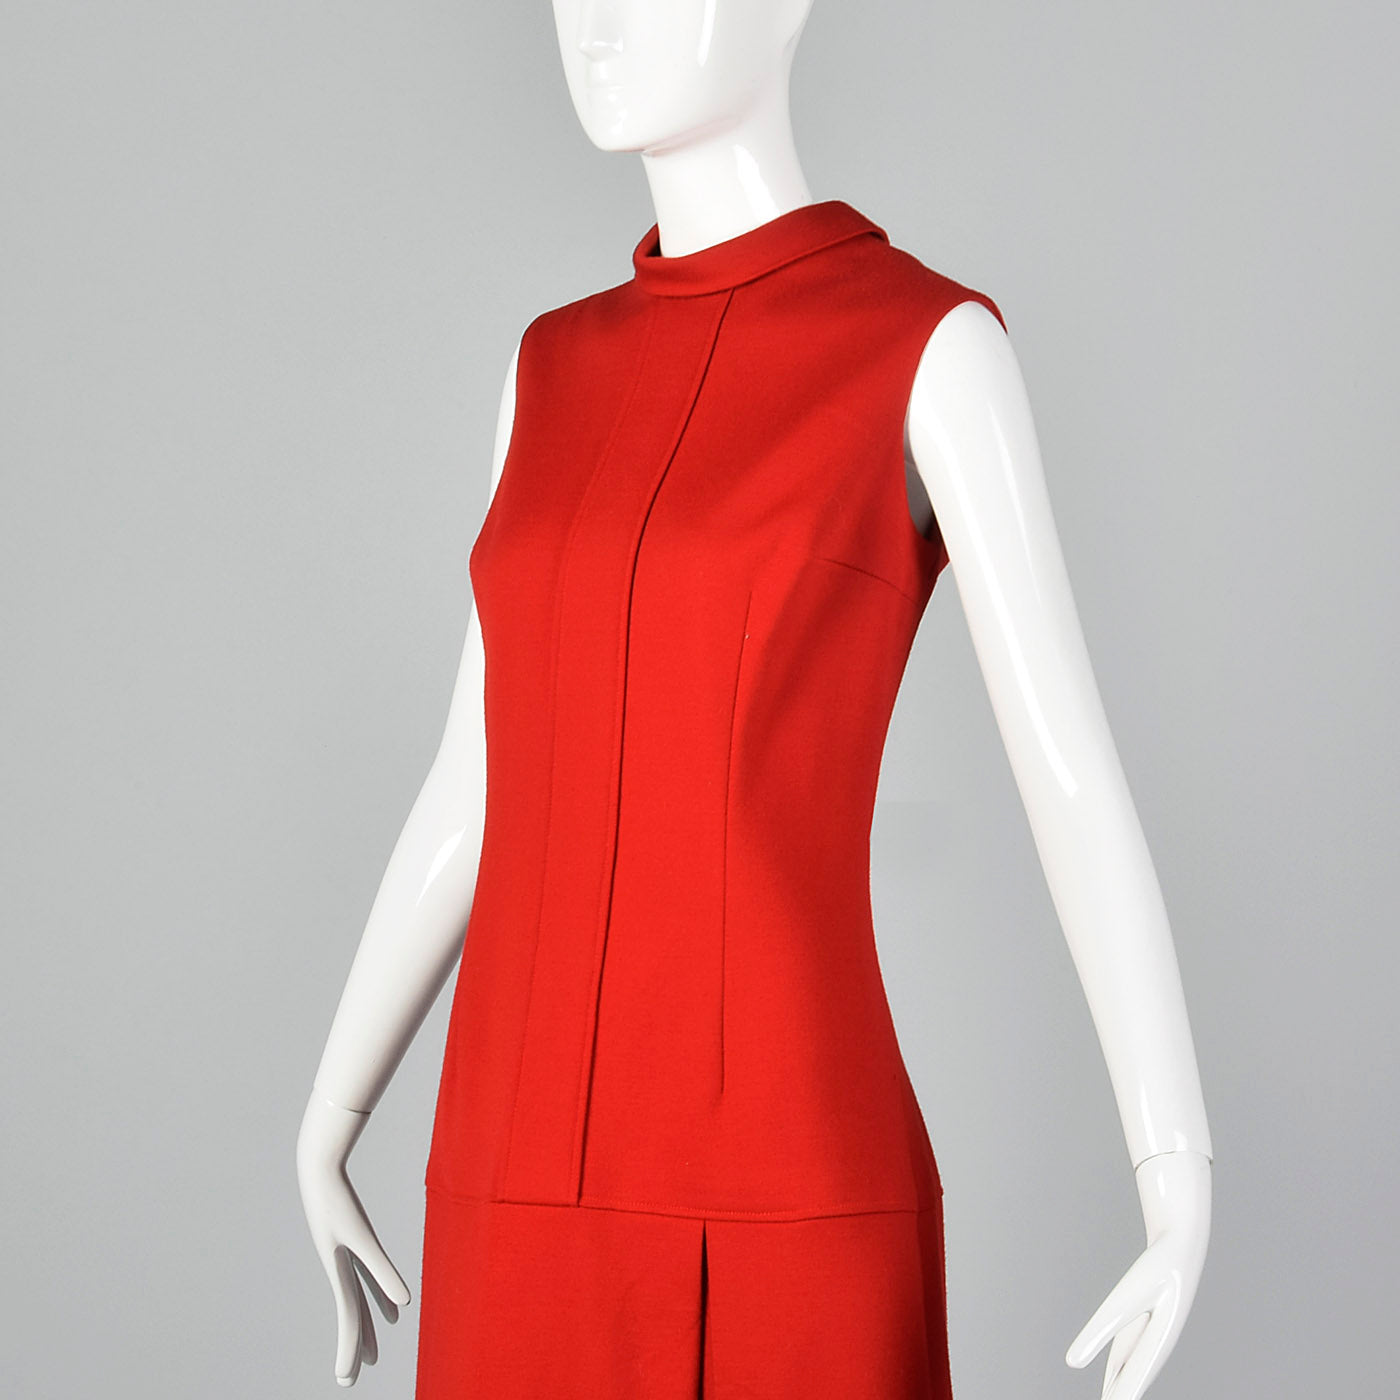 1970s Red Shift Dress with Drop Waist